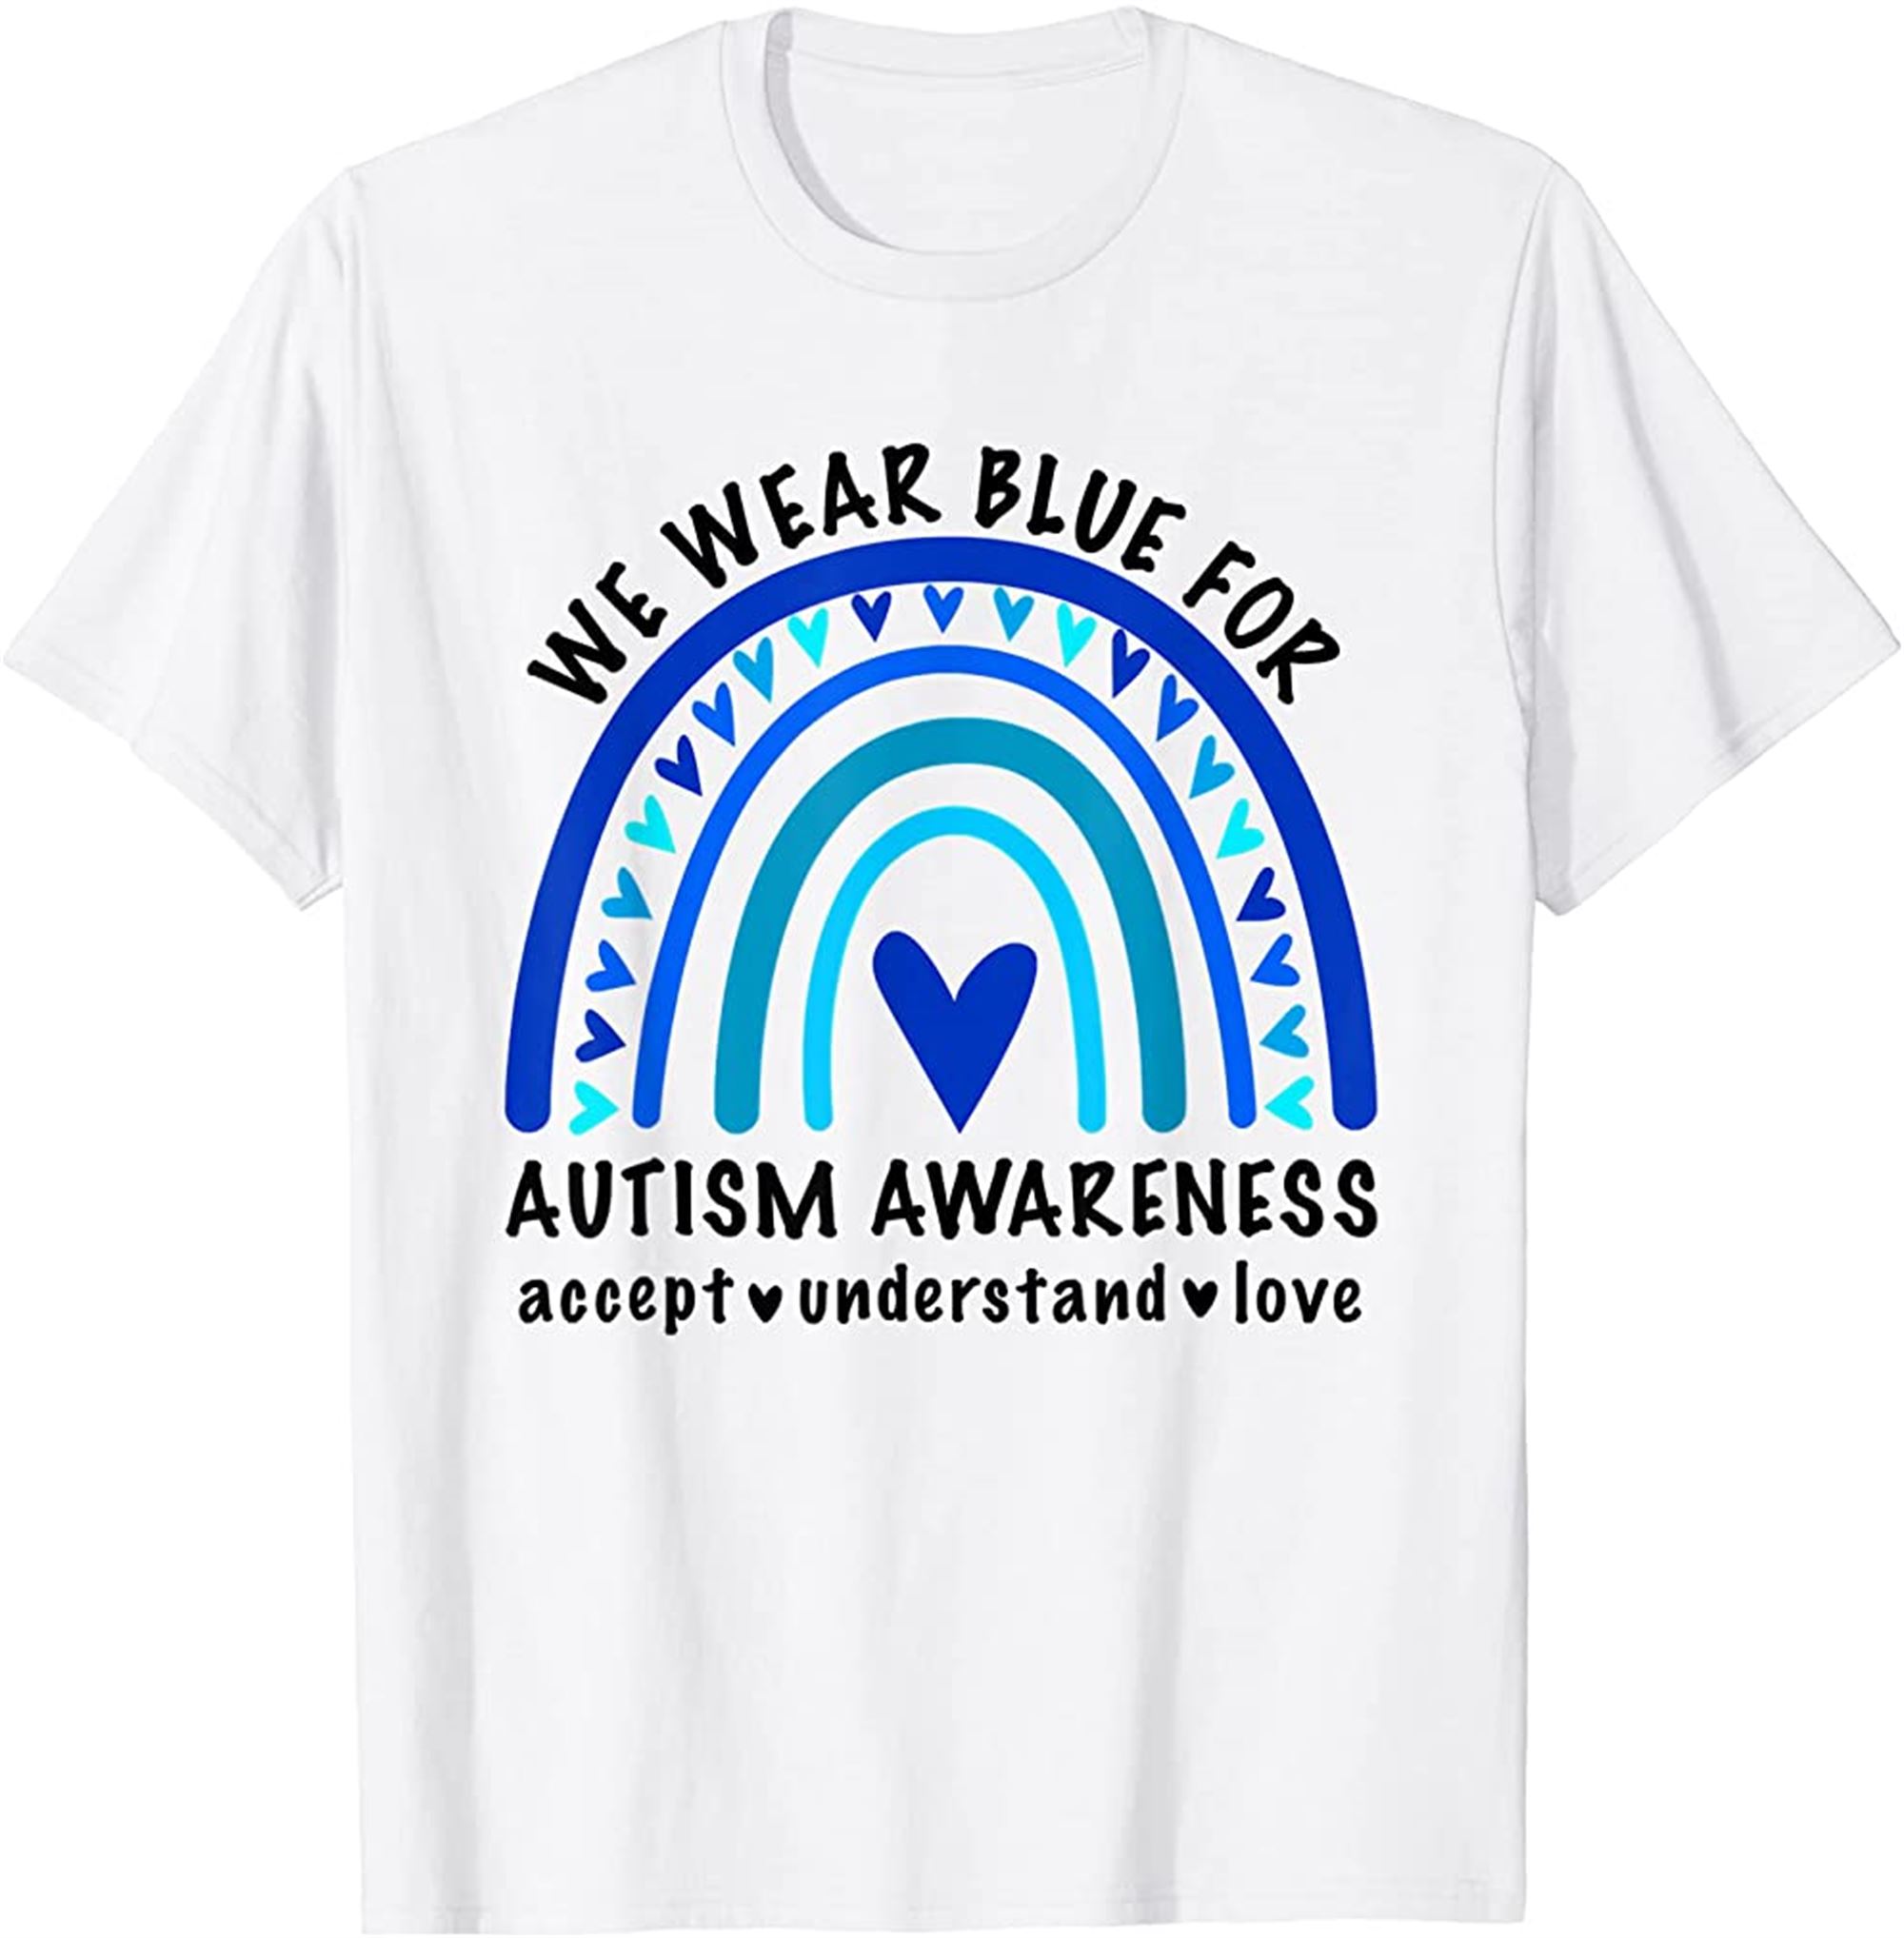 We Wear Blue For Autism Awareness In April Rainbow T-shirt Full Size Up To 5xl